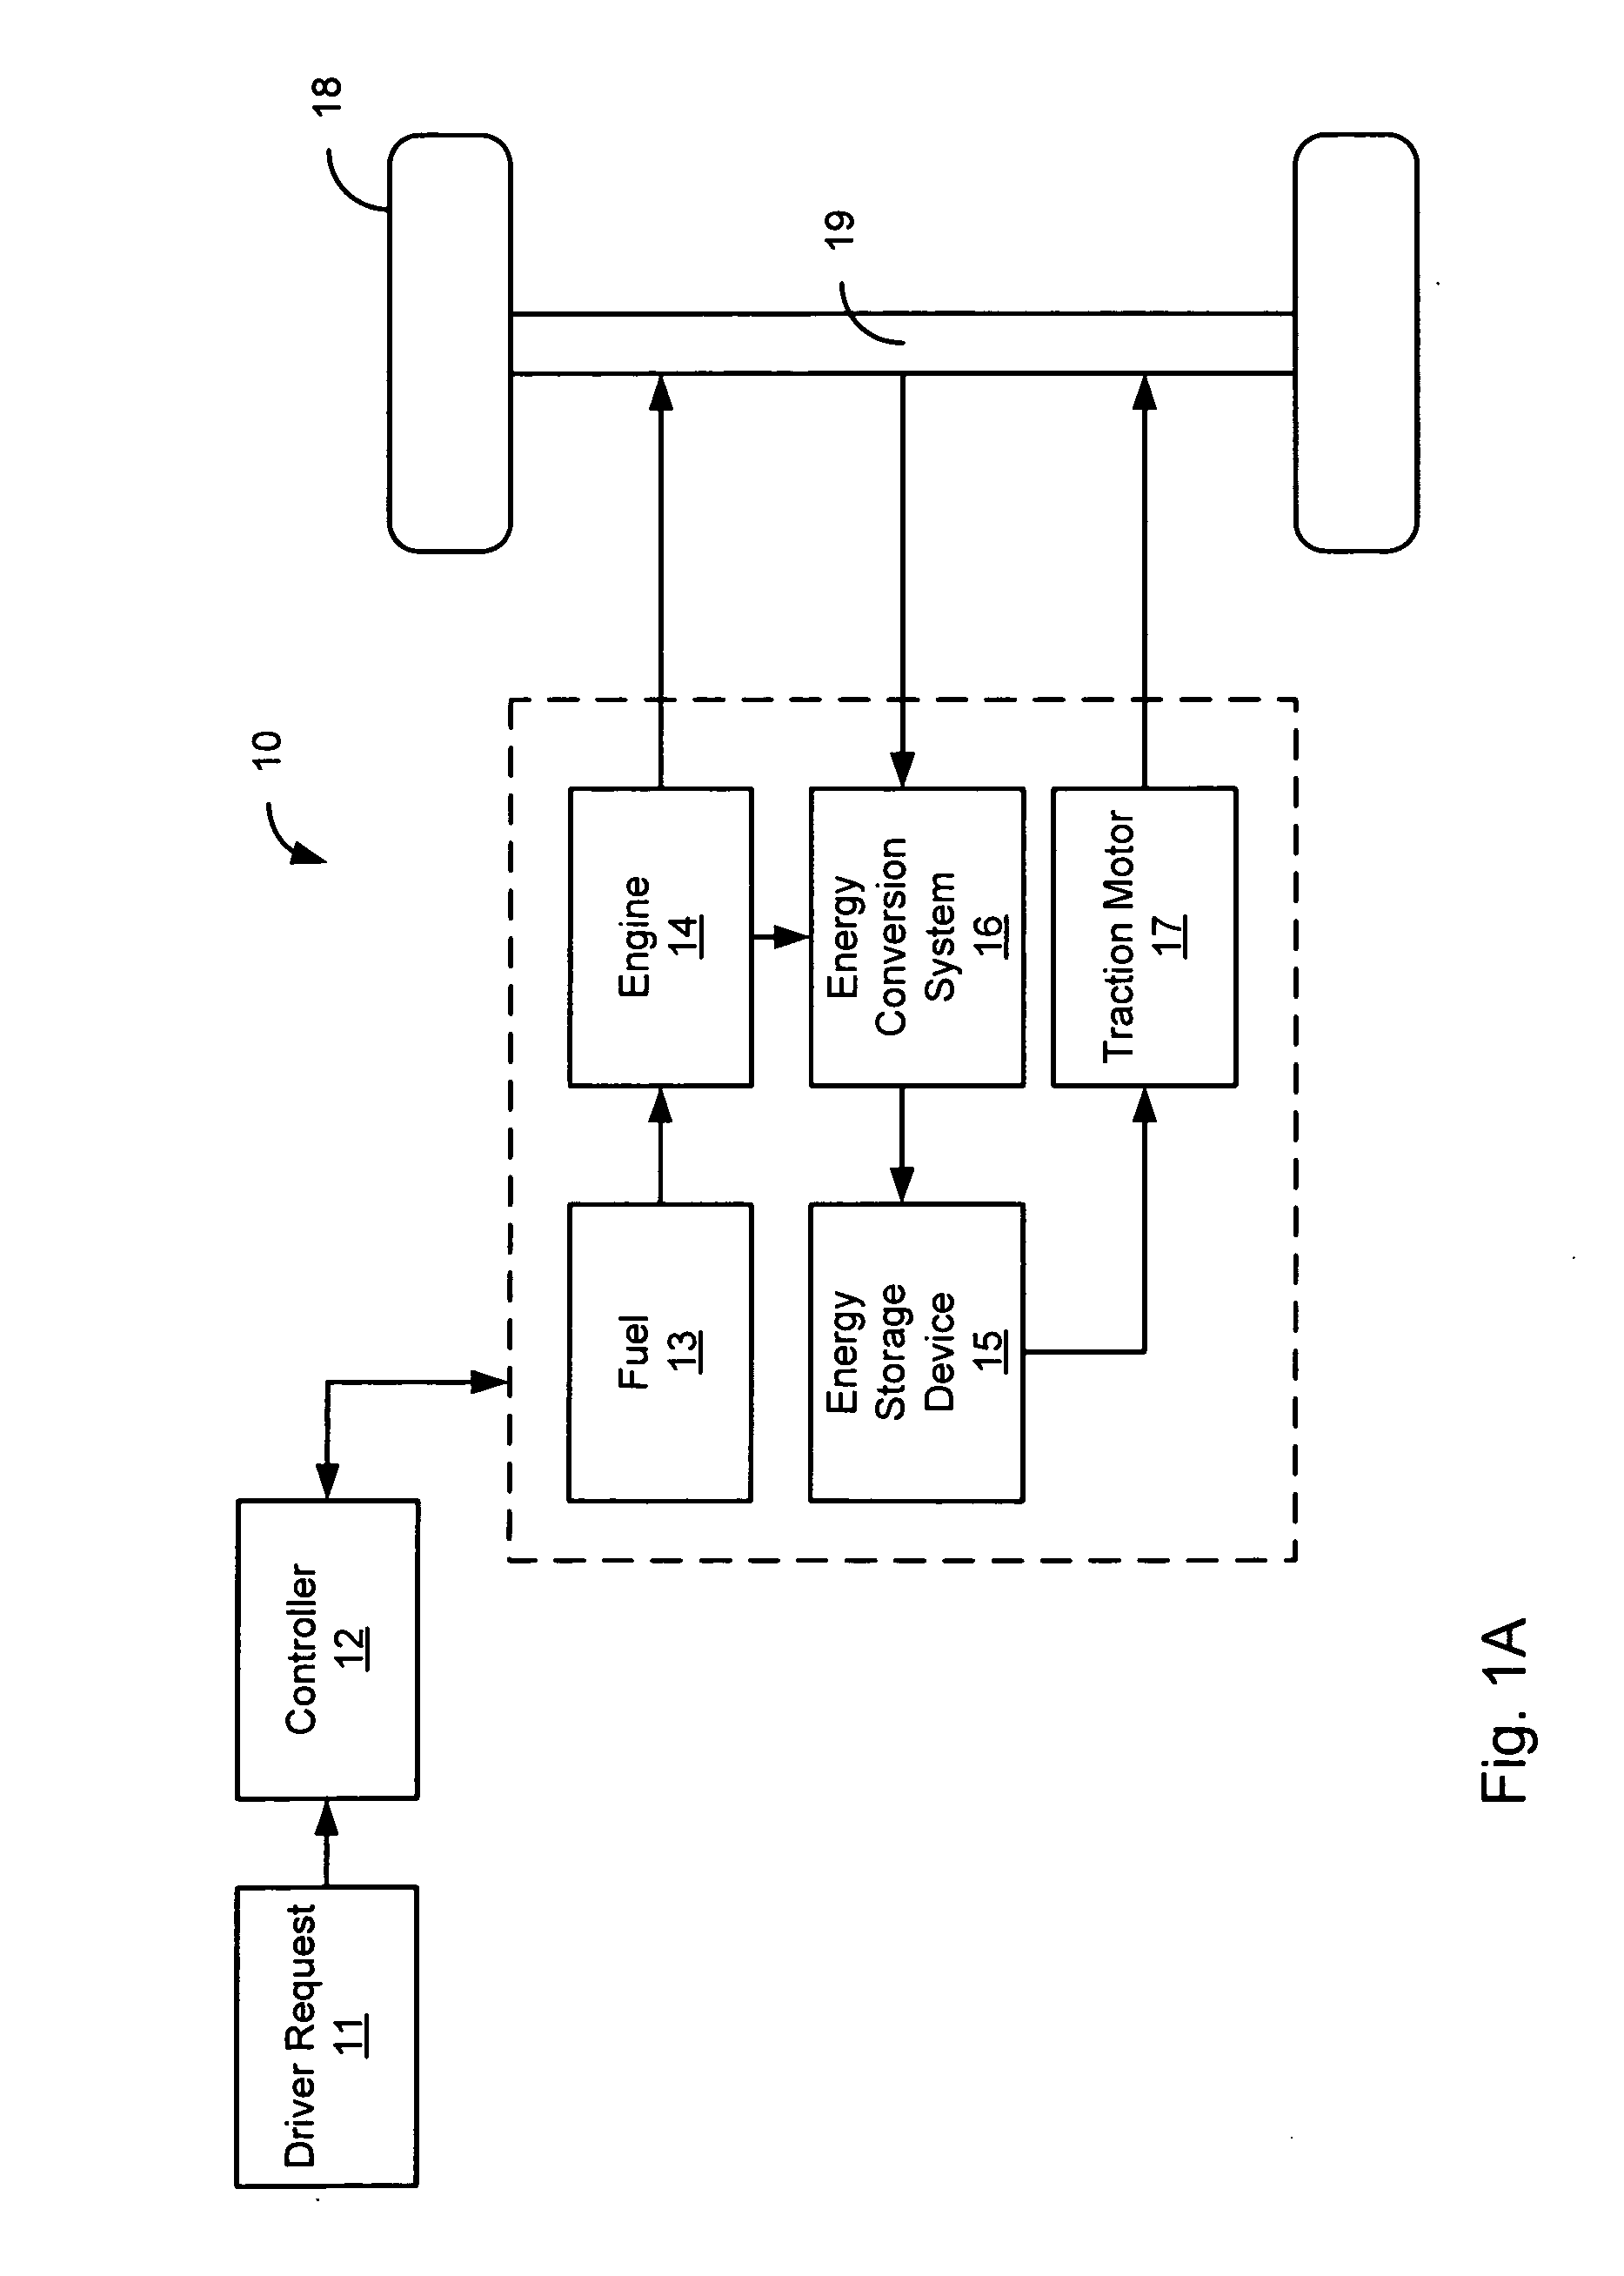 System and method for operation of an engine having multiple combustion modes and cylinder deactivation